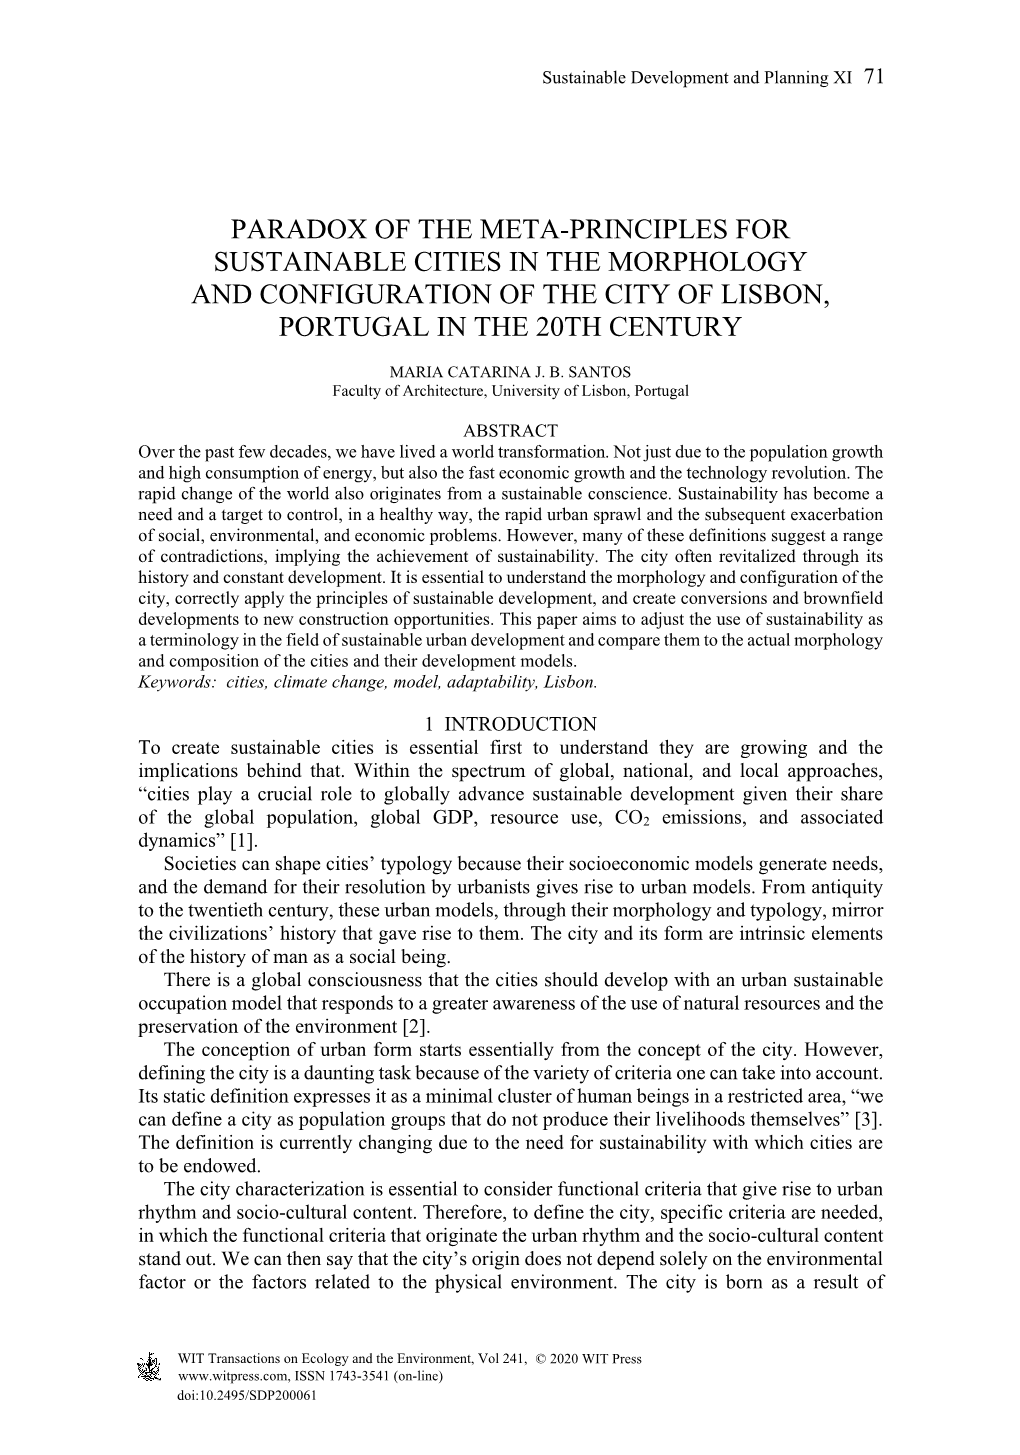 Paradox of the Meta-Principles for Sustainable Cities in the Morphology and Configuration of the City of Lisbon, Portugal in the 20Th Century